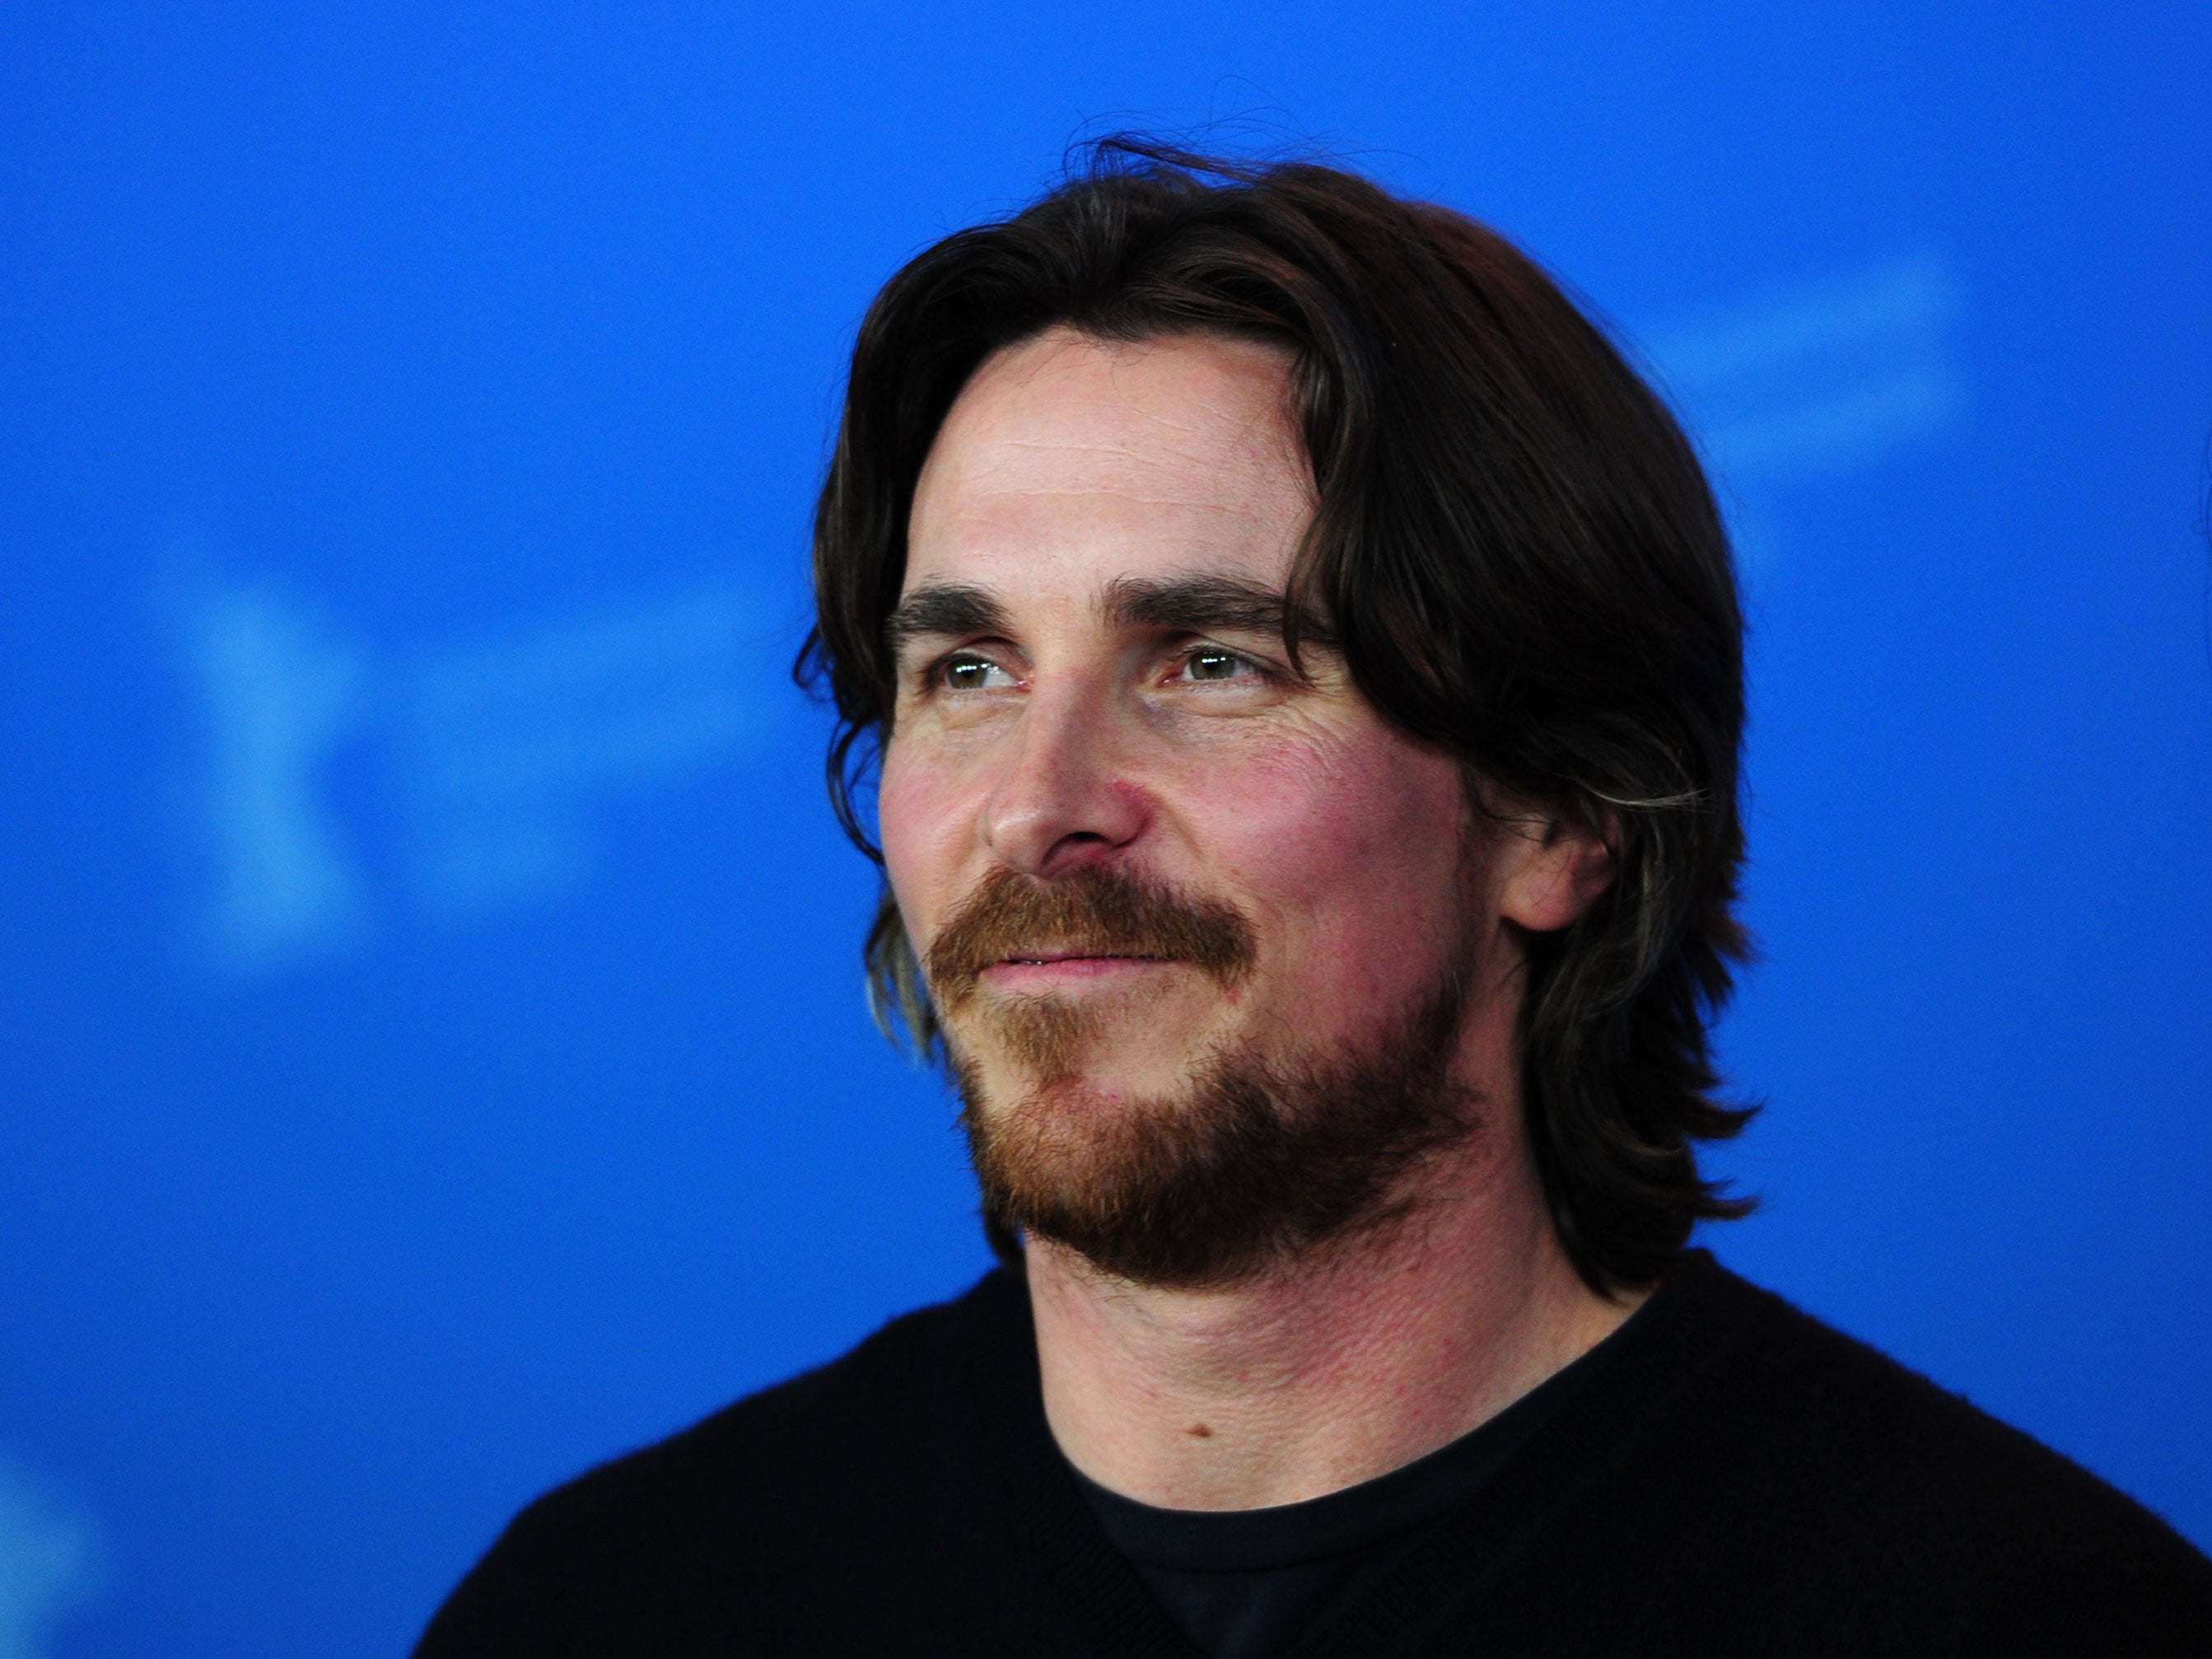 Christian Bale bears a striking resemblance to the late Apple creator 